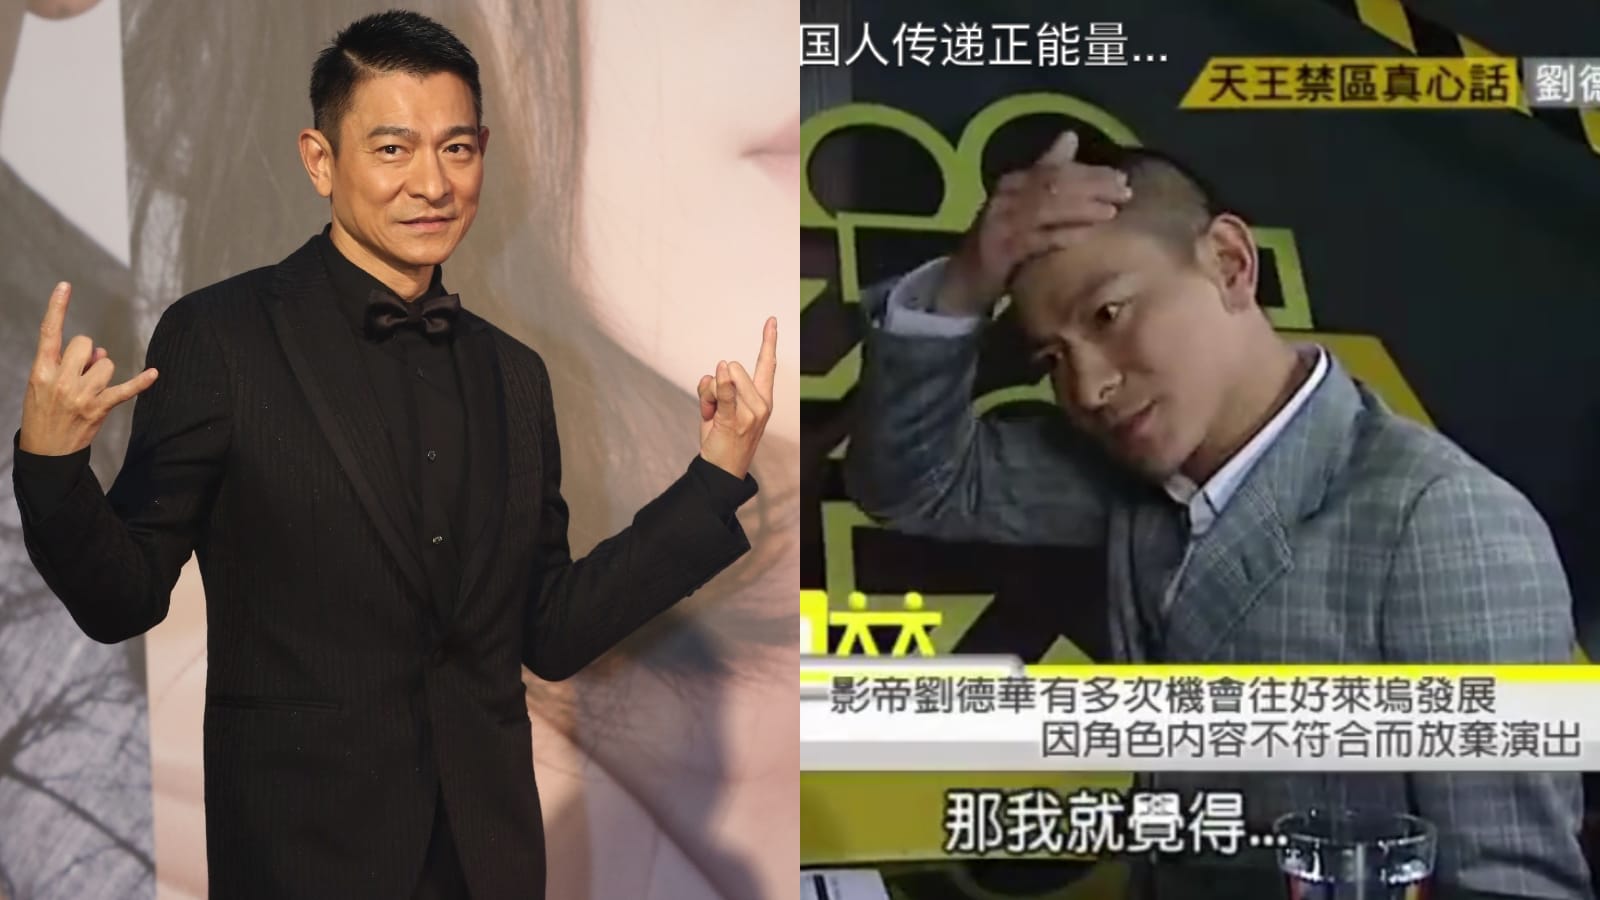 Andy Lau Once Turned Down A Hollywood Role ‘Cos He Didn’t Want To Lick A Foreigner’s Toes